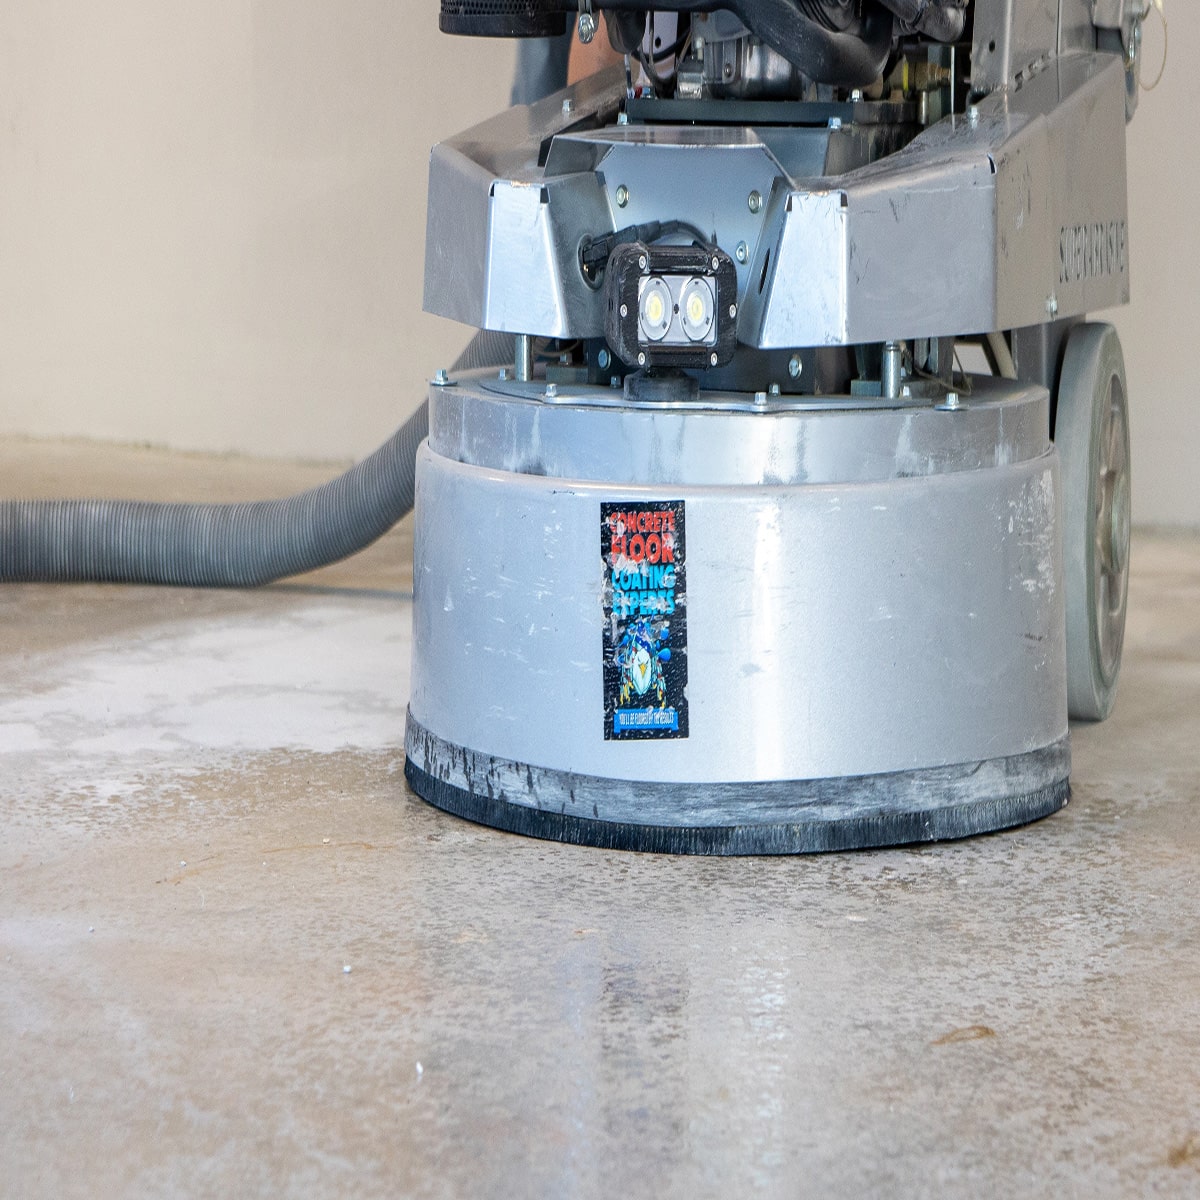 A large industrial-grade concrete flooring grinder sanding a concrete surface for epoxy resin installation.